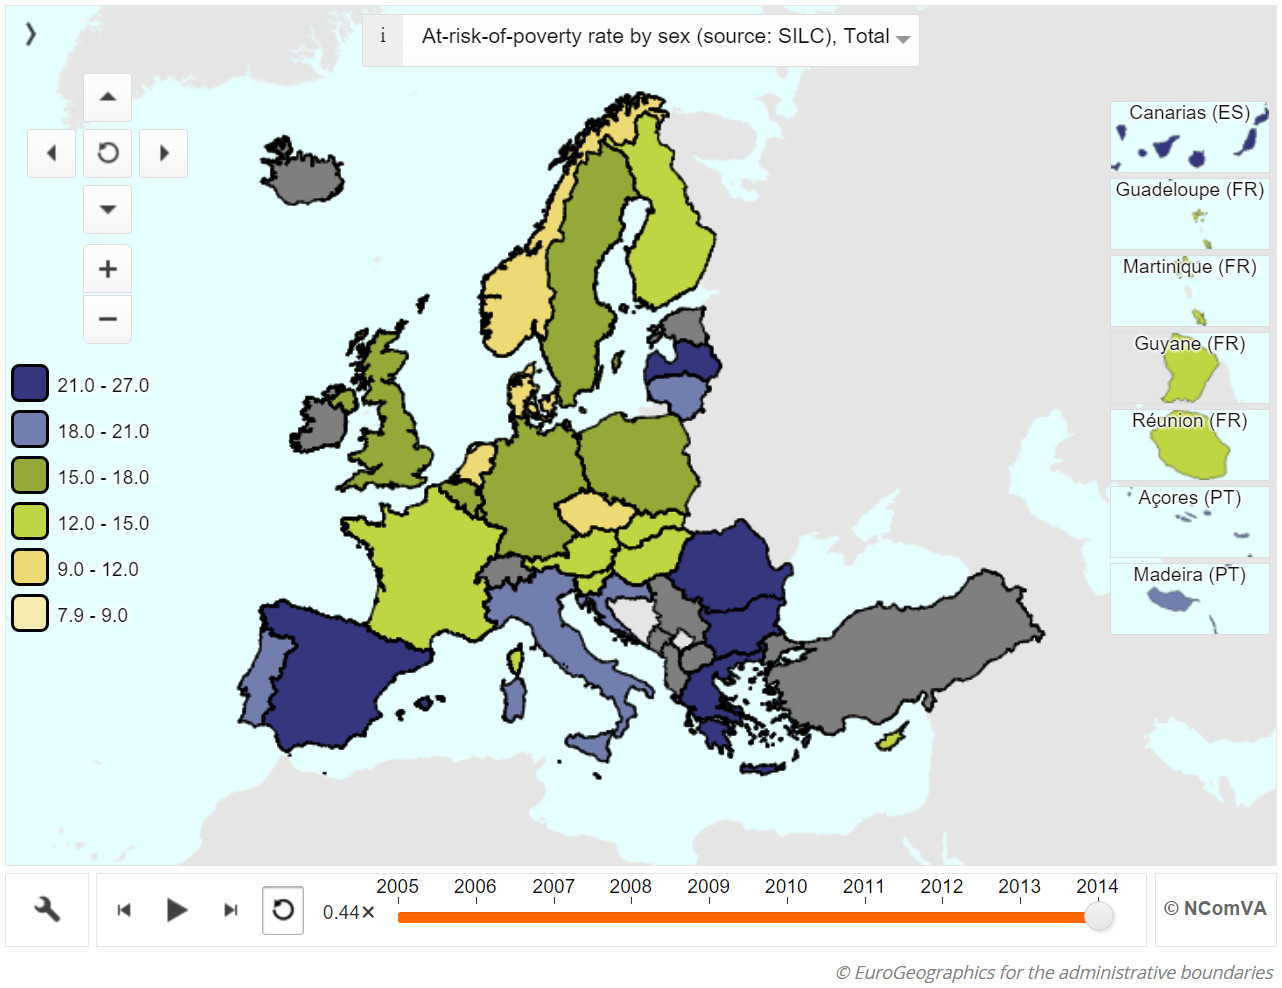 At-risk-of-povery rate by sex (SILC, Total, 2014)